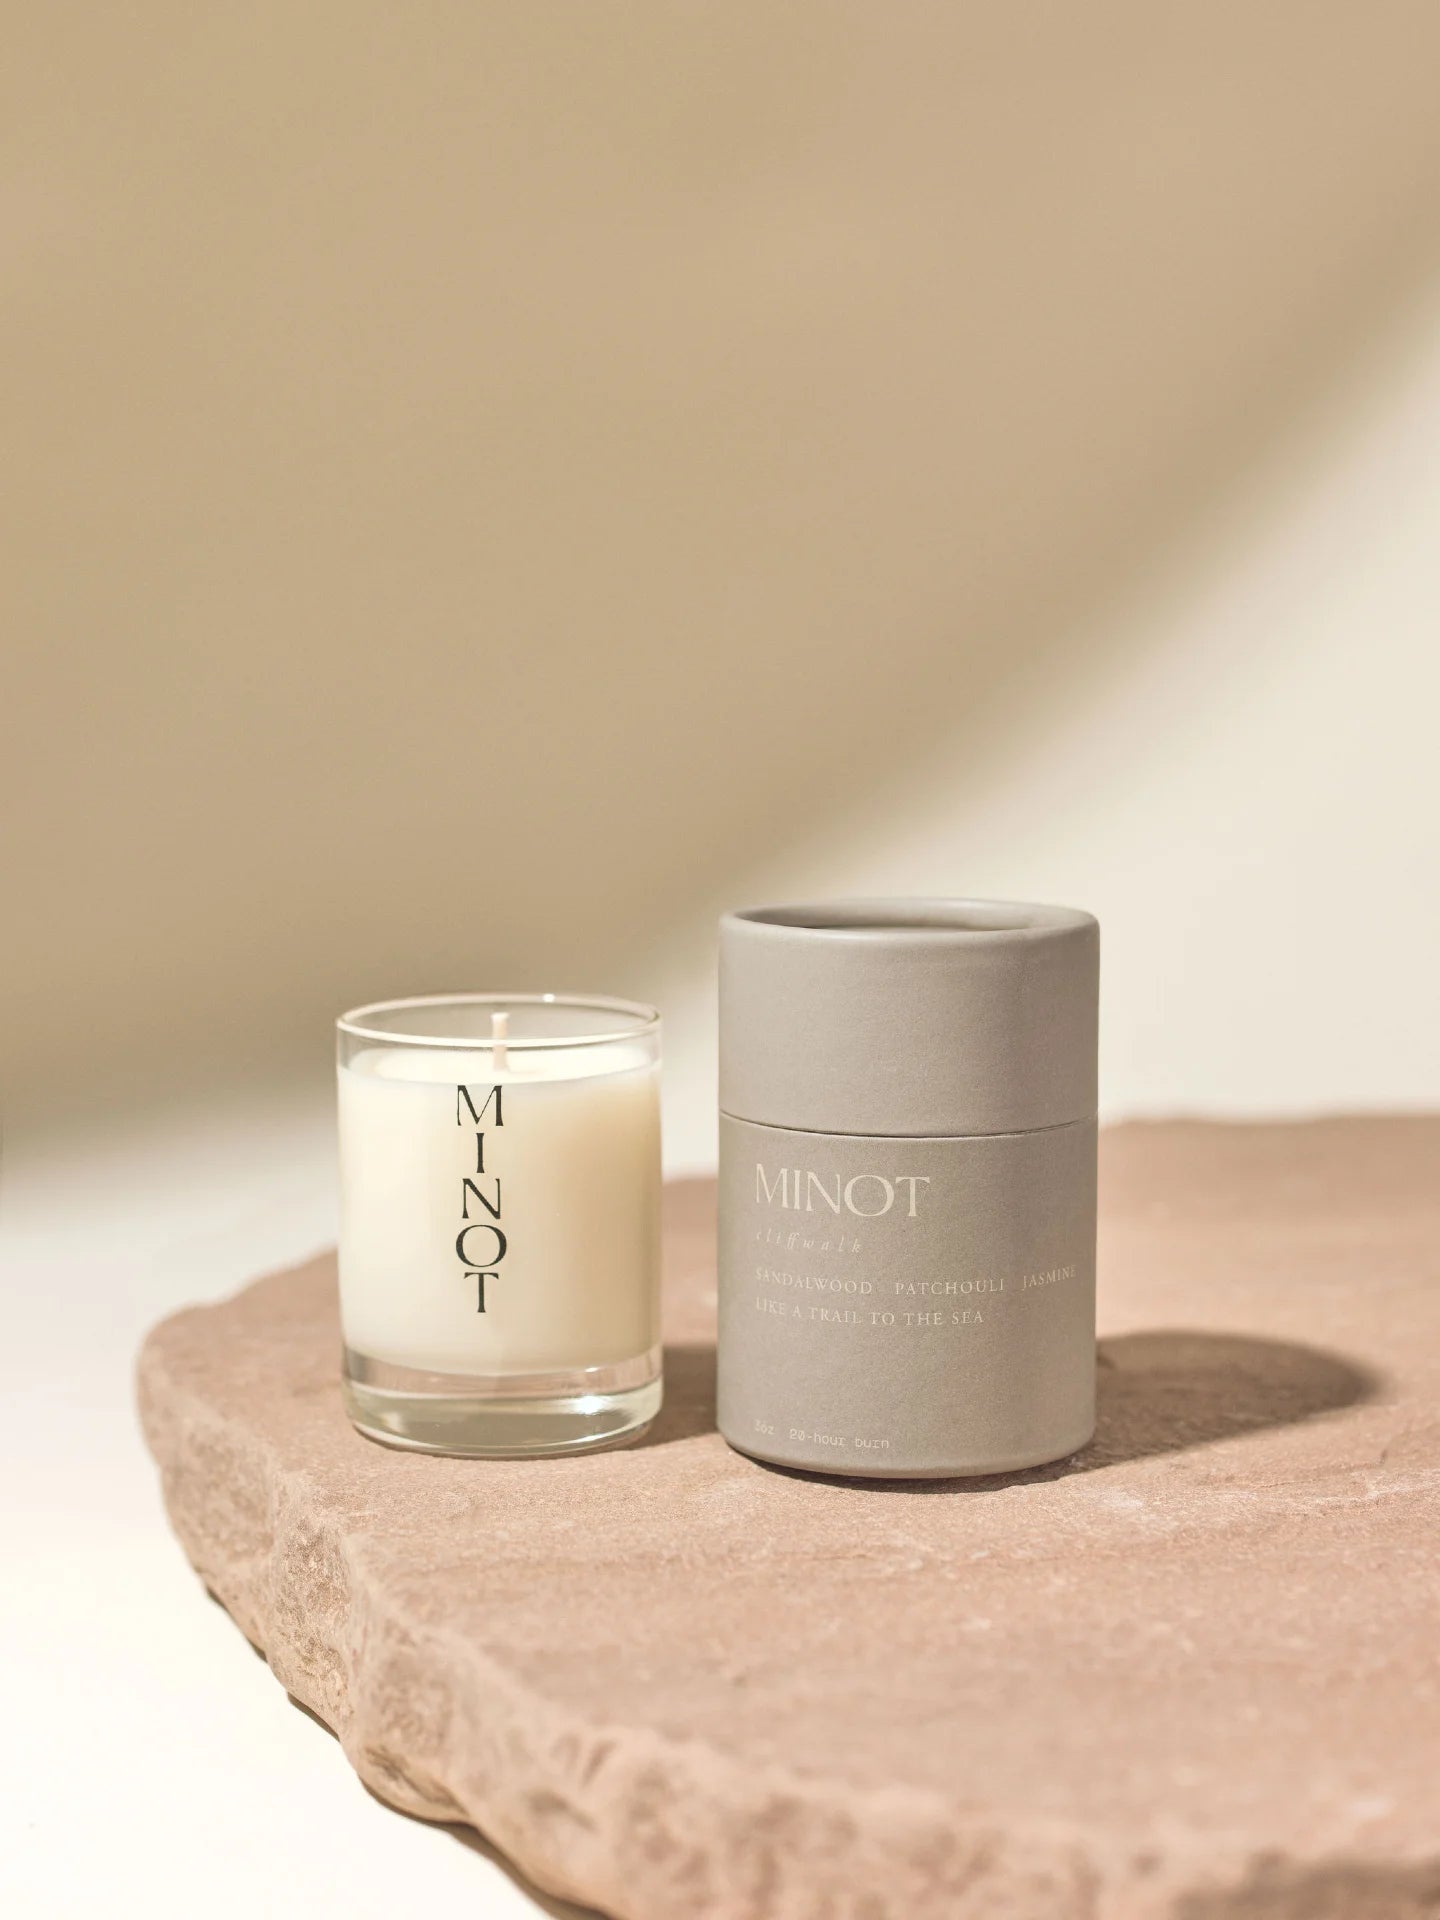 Cliffwalk Mini is a clean-burning travel candle with sandalwood, patchouli and jasmine notes